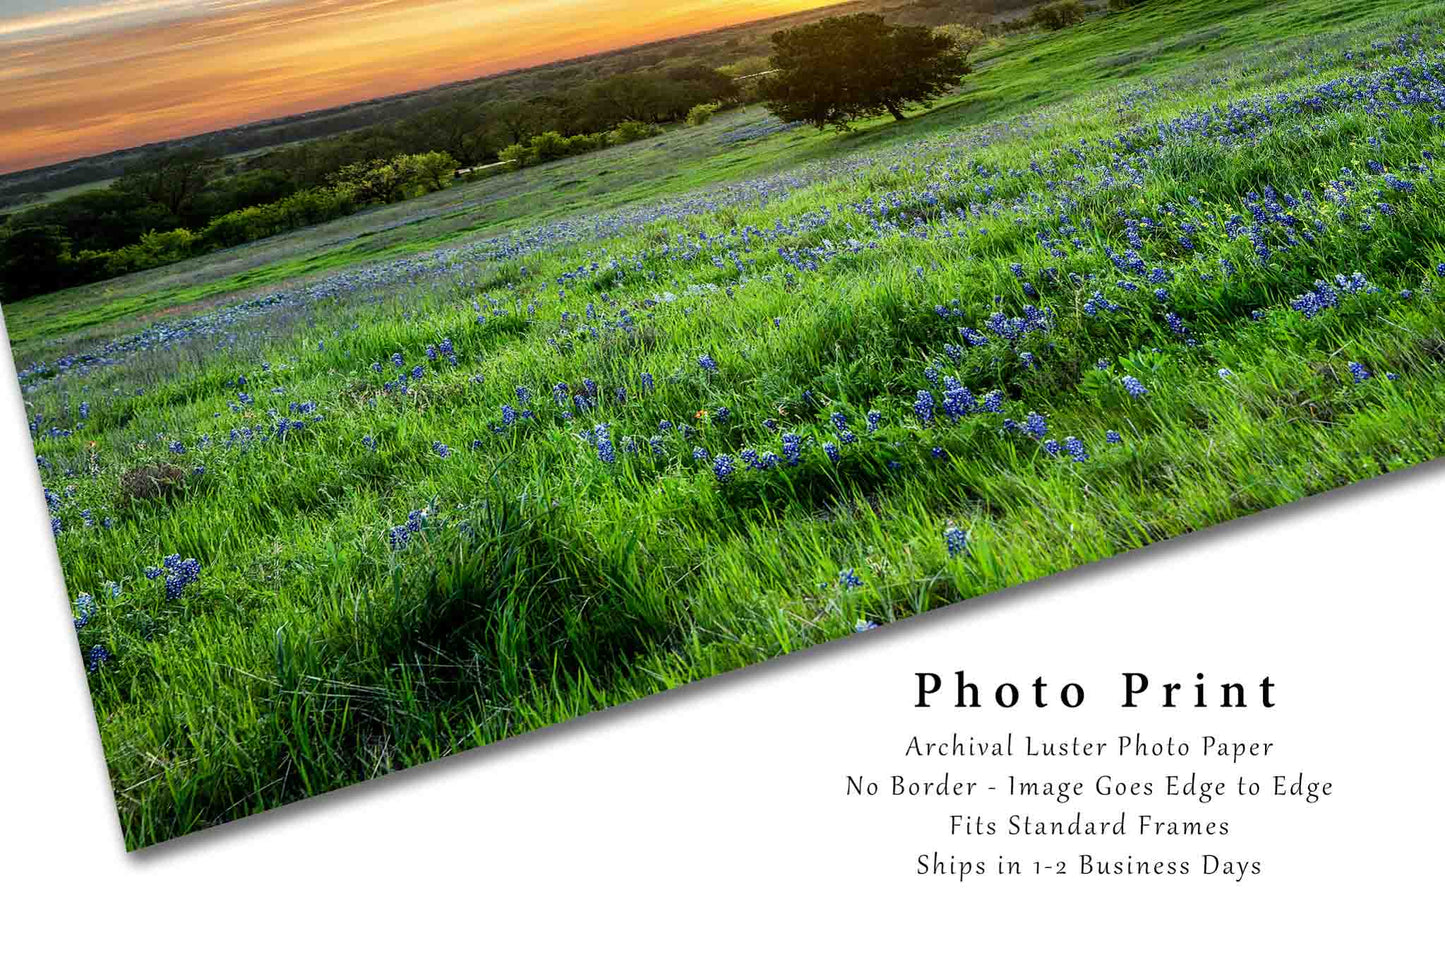 Country Photo Print | Lone Tree in Field of Texas Bluebonnets Picture | Wildflower Wall Art | Landscape Photography | Nature Decor